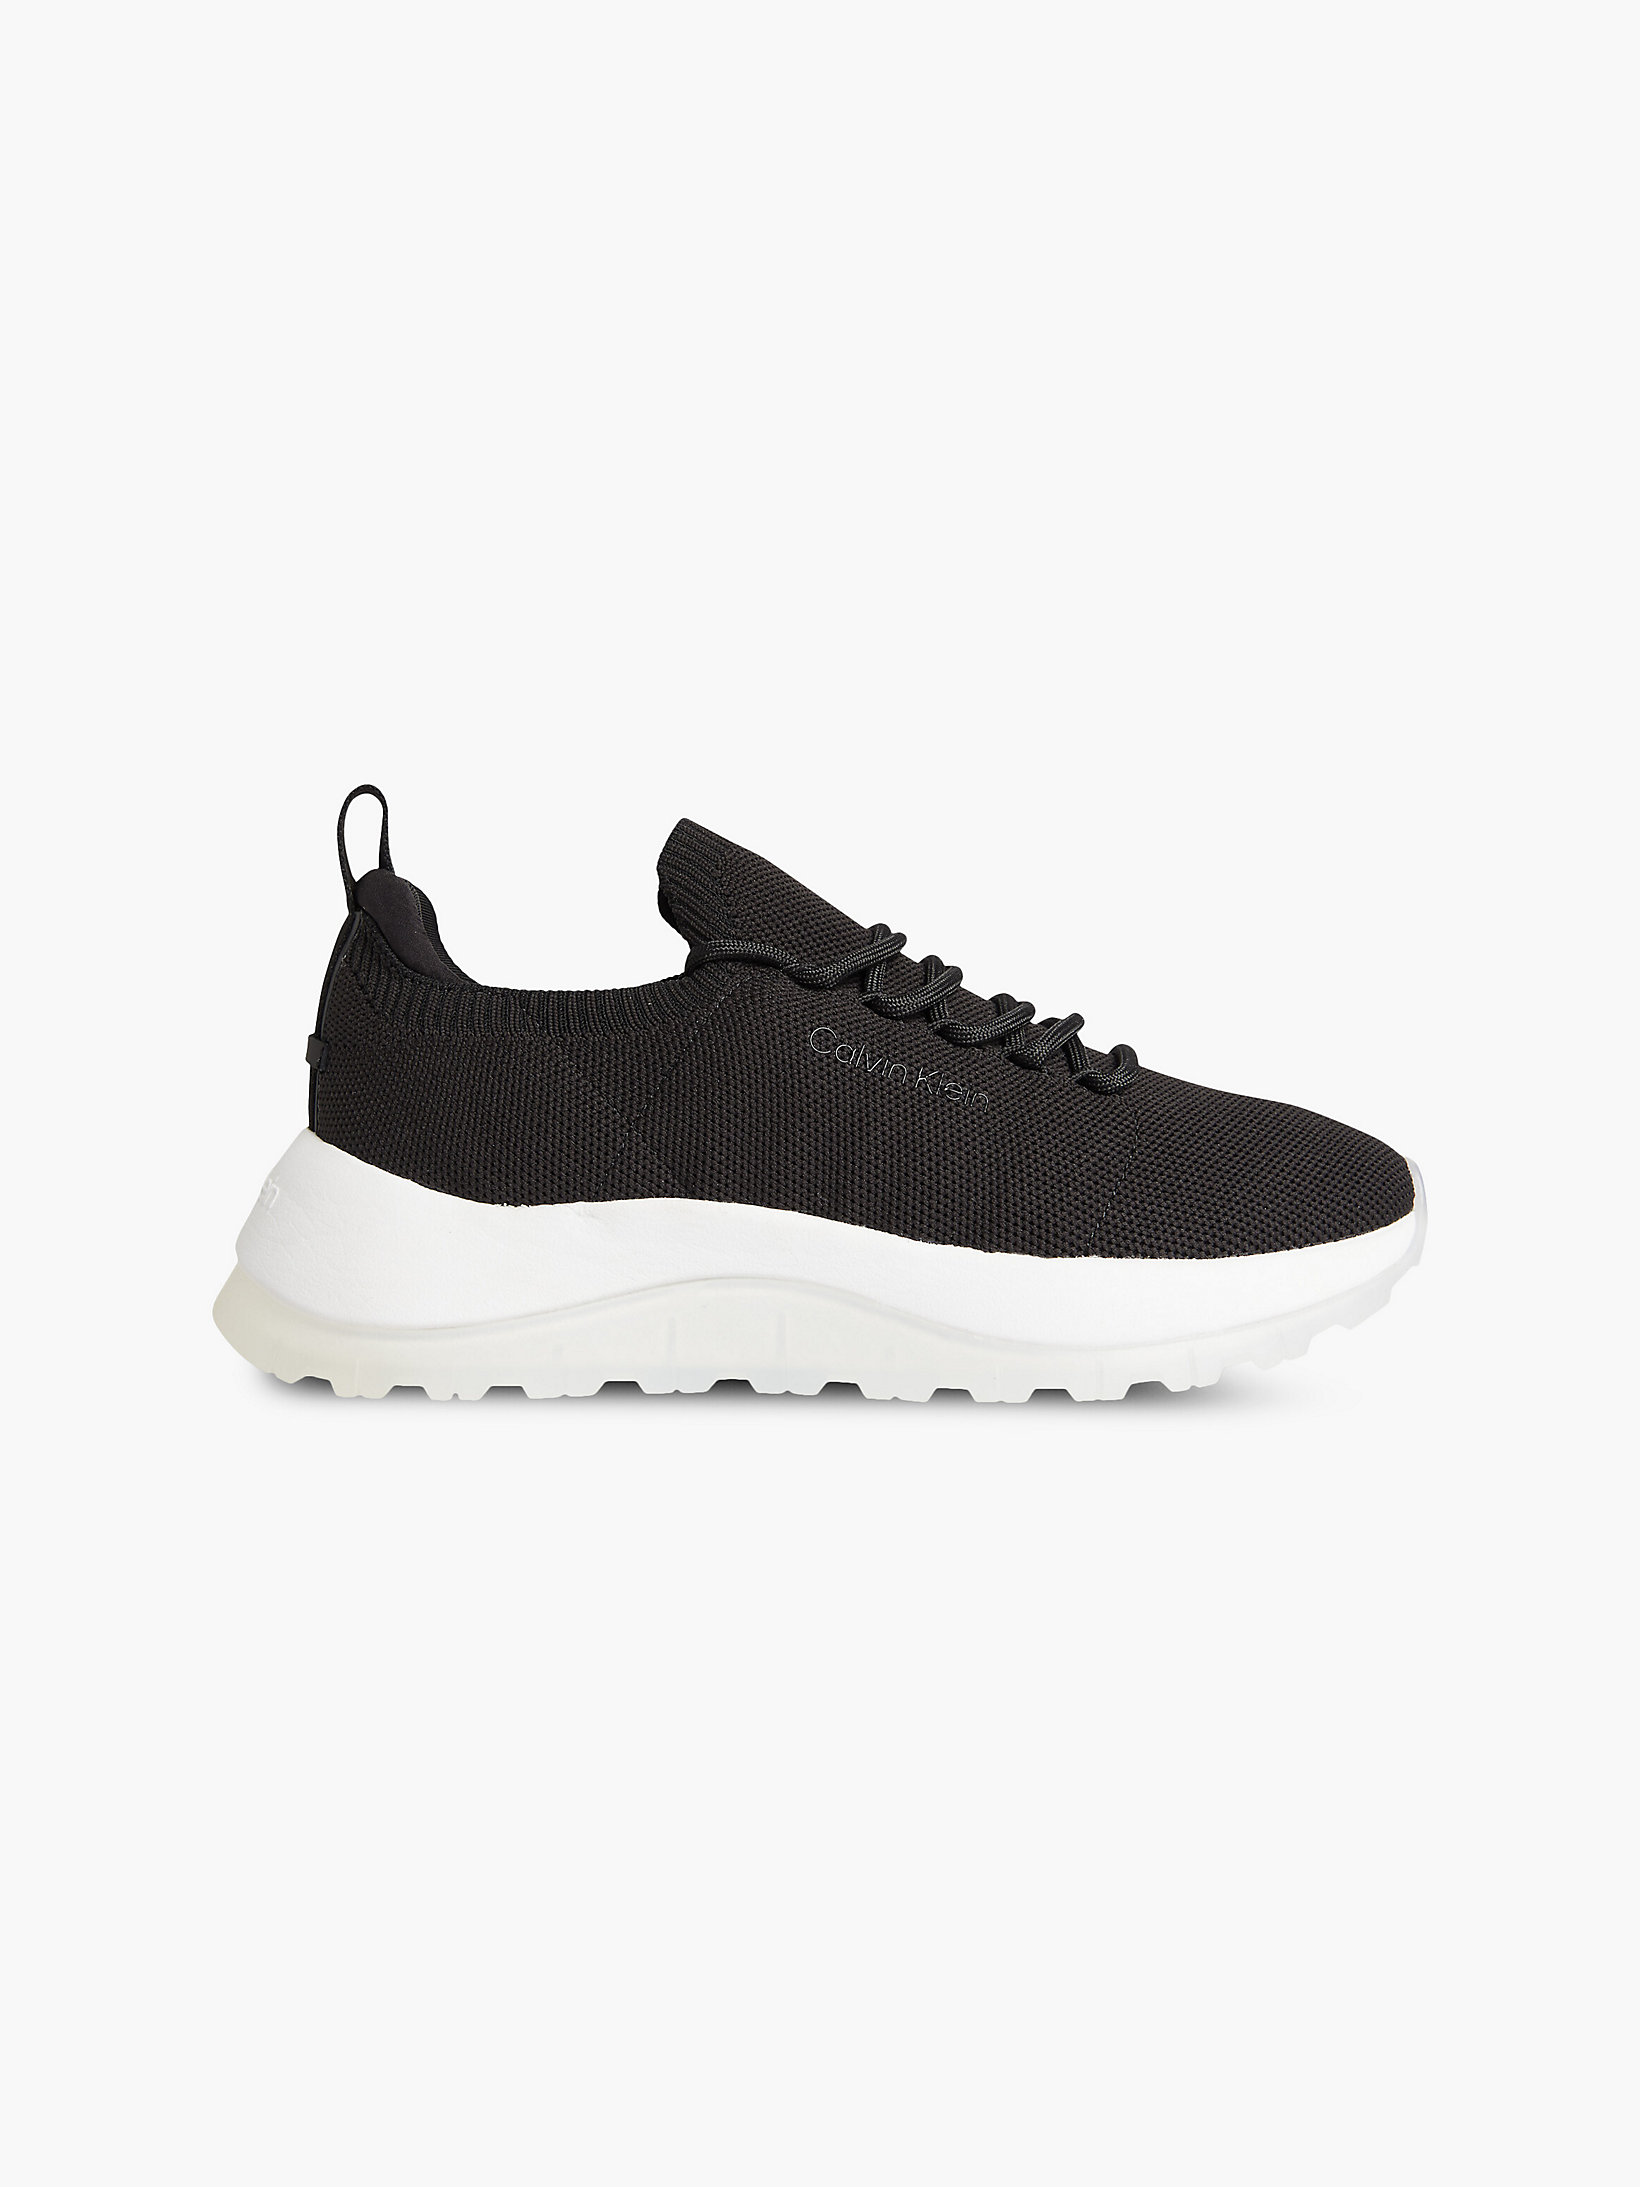 CK Black Recycled Sock Trainers undefined women Calvin Klein